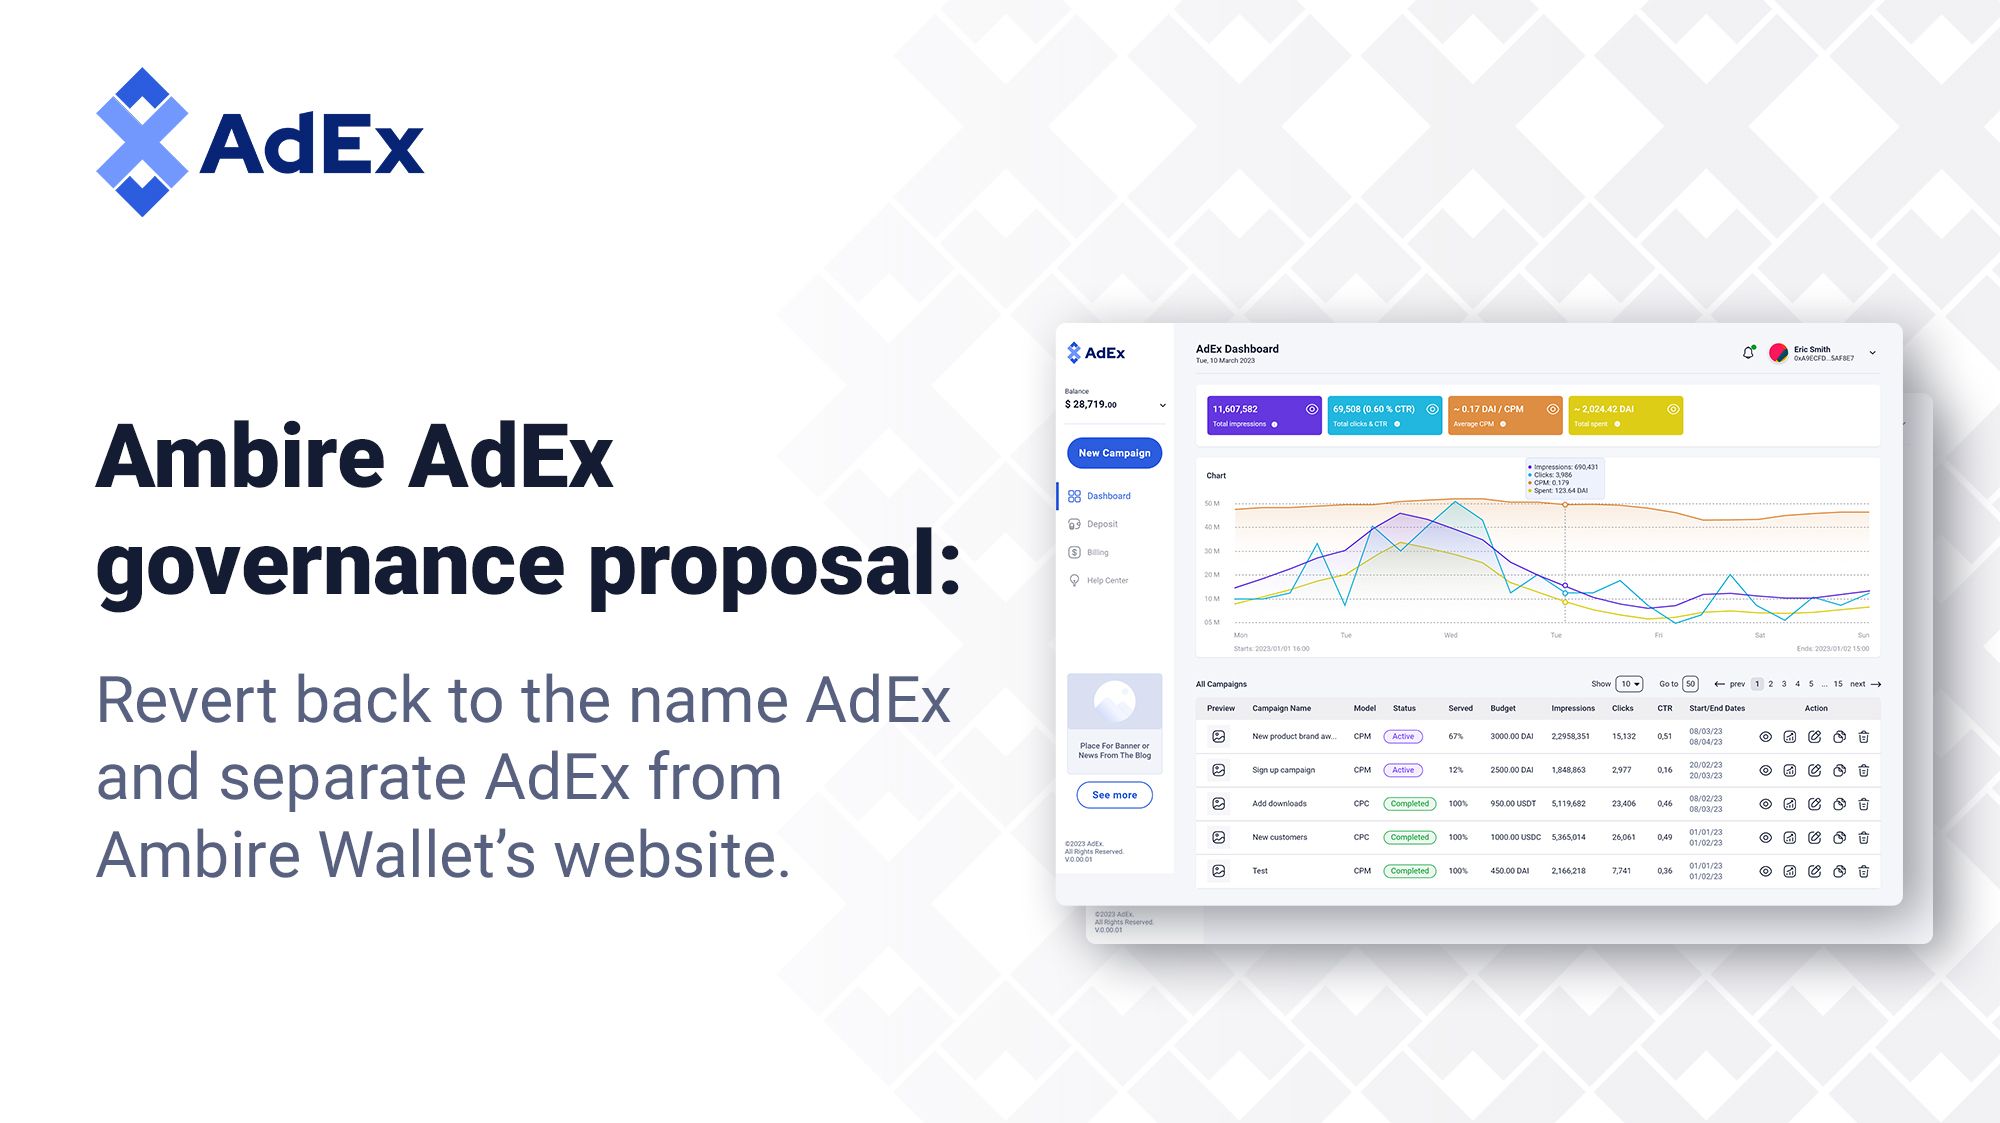 Ambire AdEx governance proposal: Revert to AdEx and separate the two websites